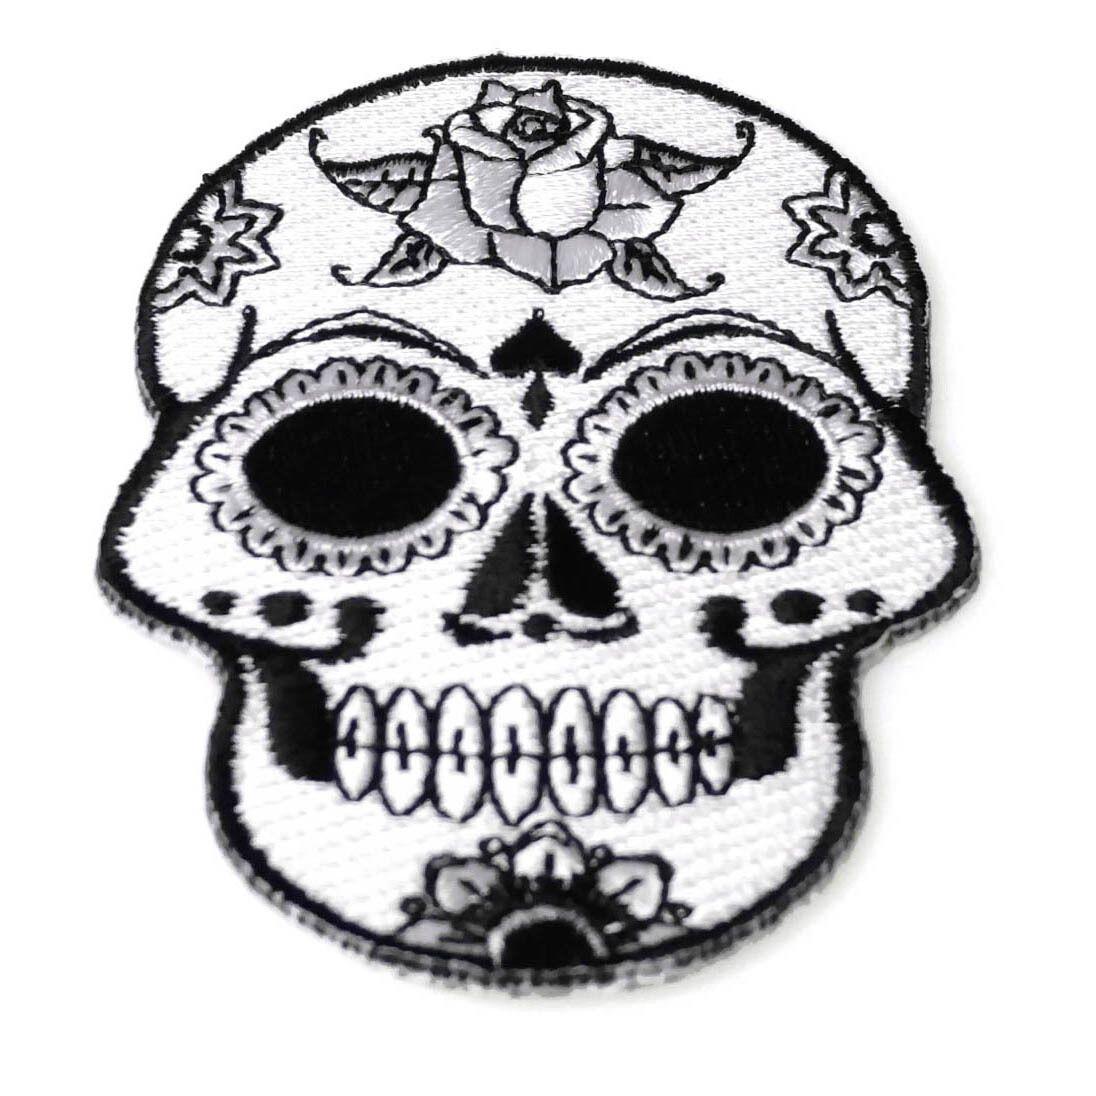 Black and White Skull Logo - Embroidered Small Black White Sugar Skull Sew or Iron on Patch Biker ...